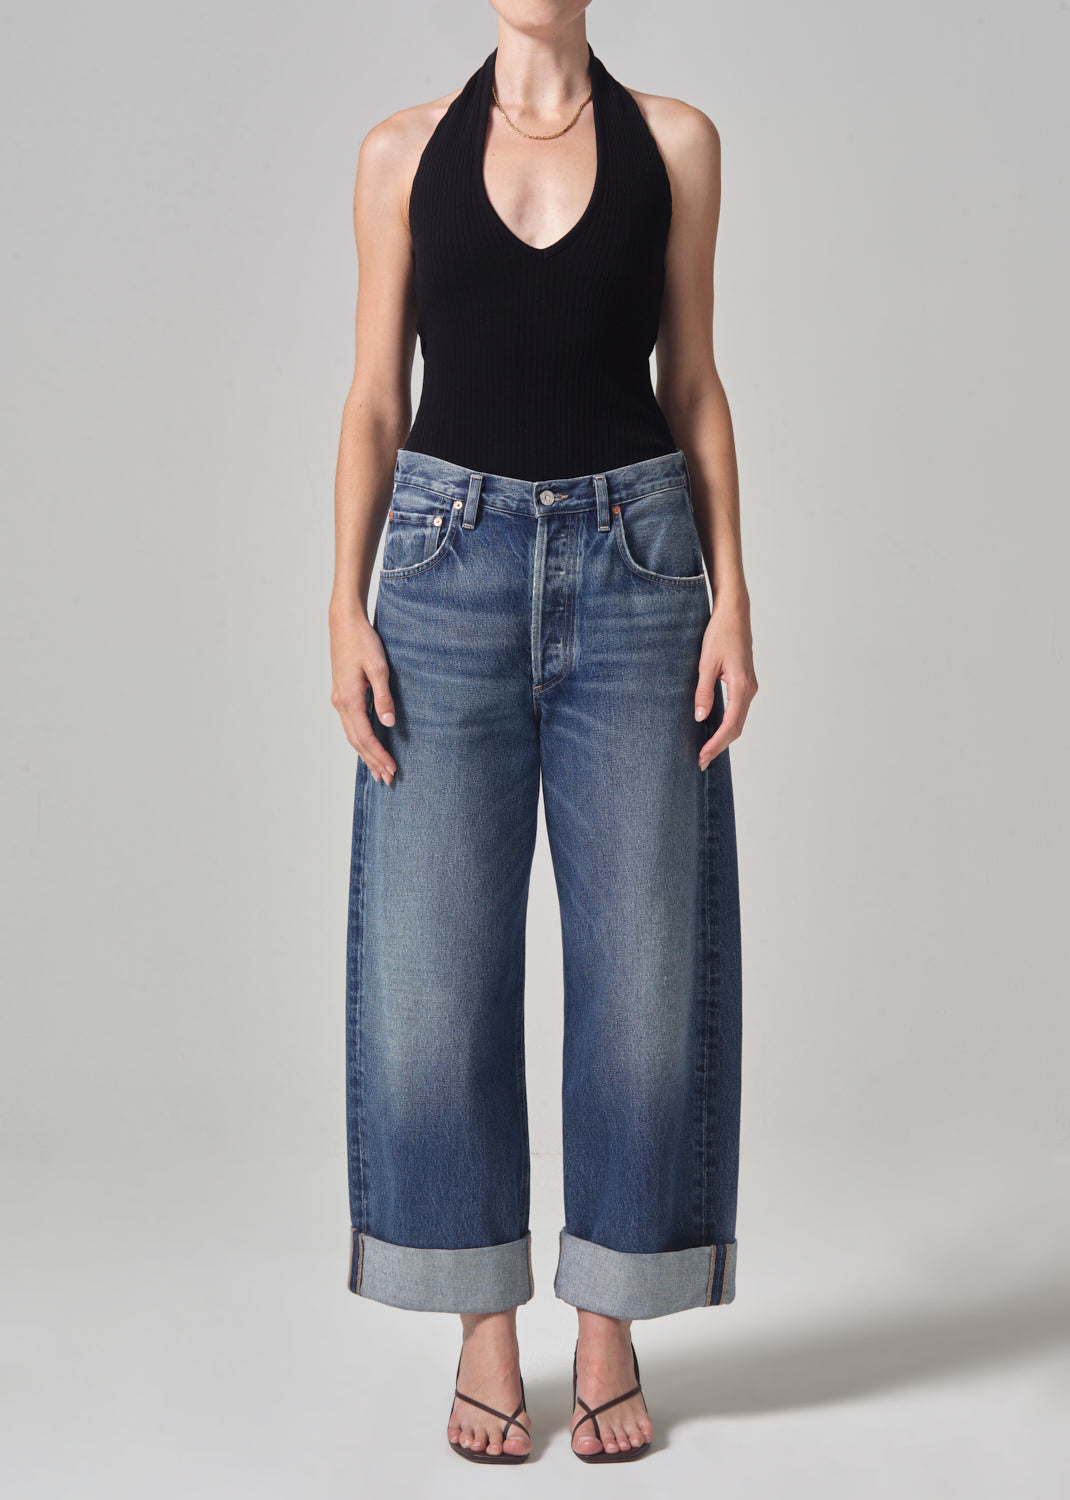 Ayla Baggy Cuffed Crop in Brielle – Citizens of Humanity